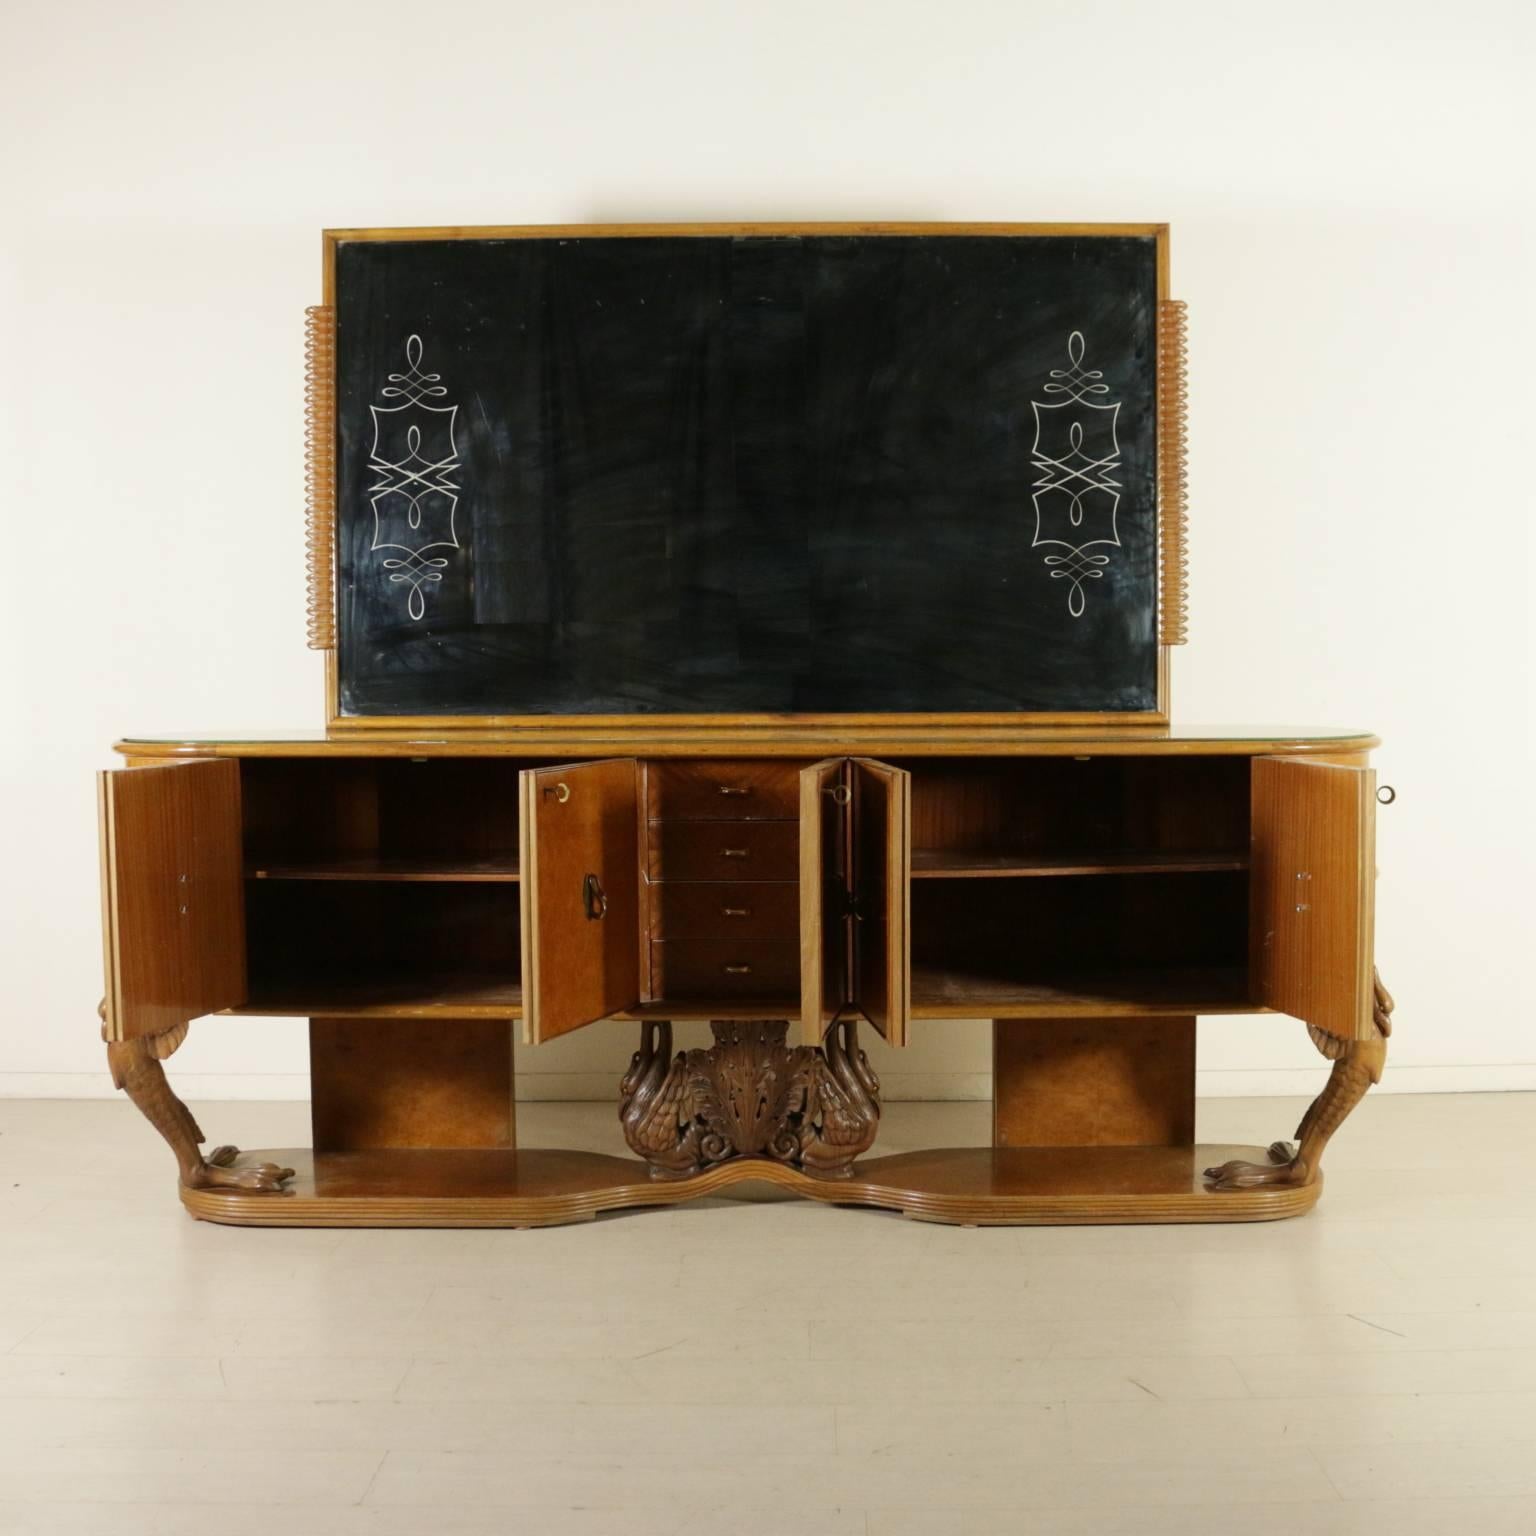 A sideboard with mirror, burl veneer, carved wooden legs, back-treated glass top, brass handles. Manufactured in Italy, 1940s.